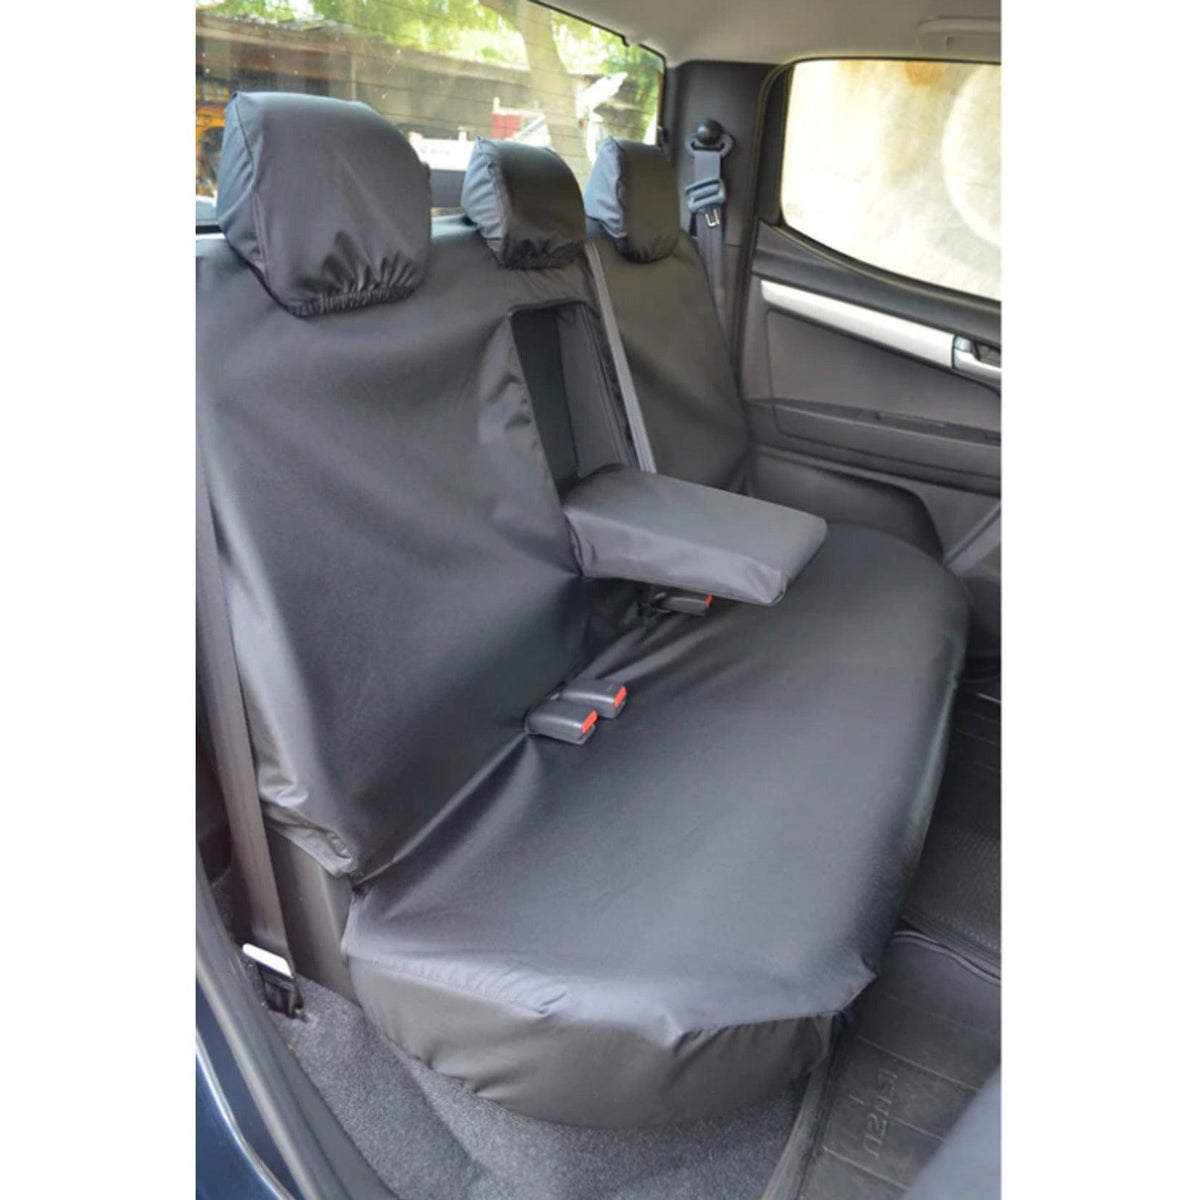 ISUZU D-MAX 2021 ONWARD REAR SEAT COVERS - BLACK WITH CENTRAL ARMREST - Storm Xccessories2